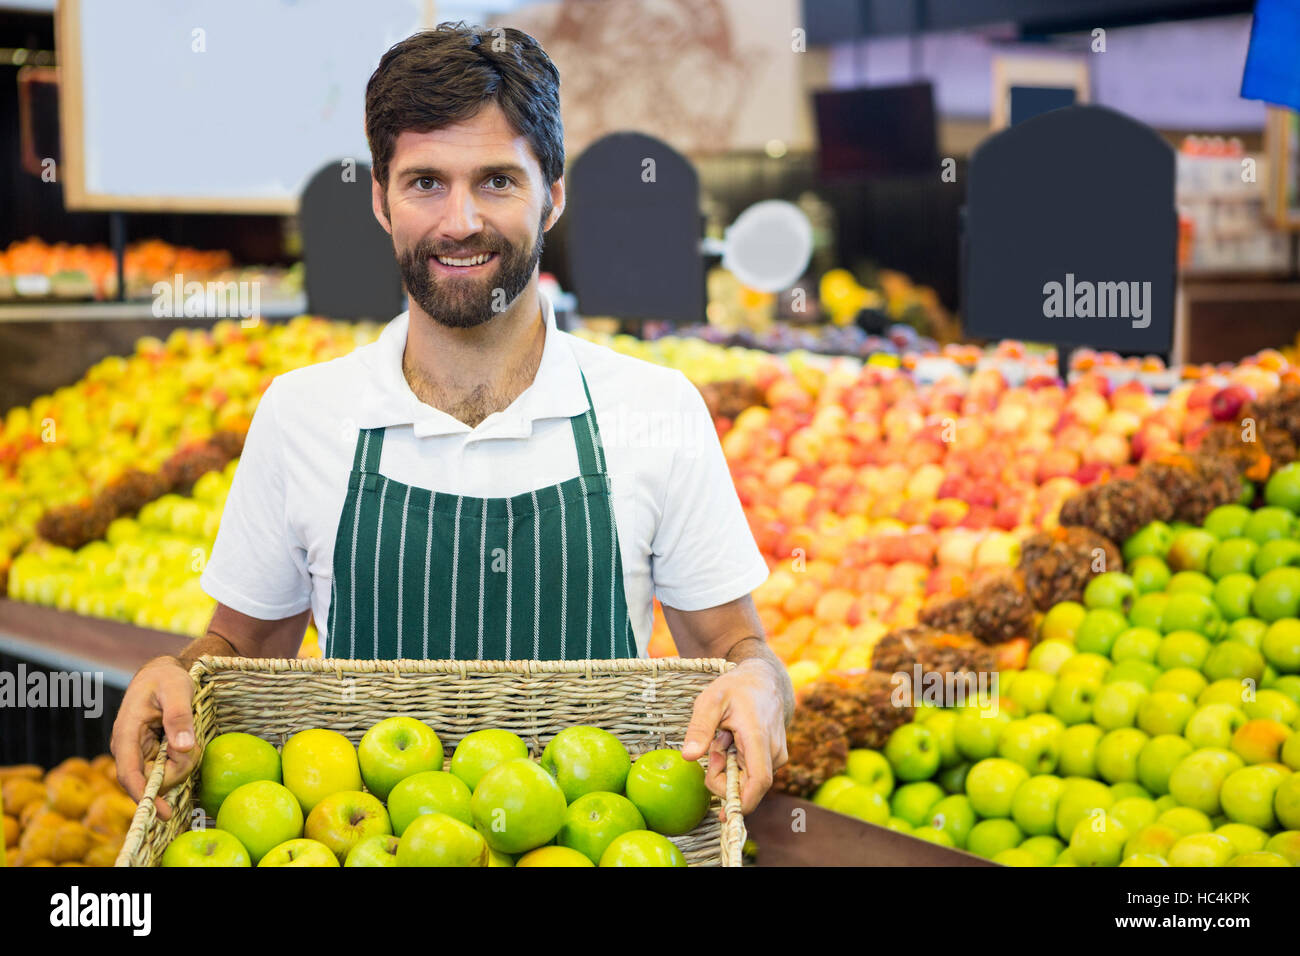 Smiling male staff holding a basket of green apple at supermarket Stock Photo